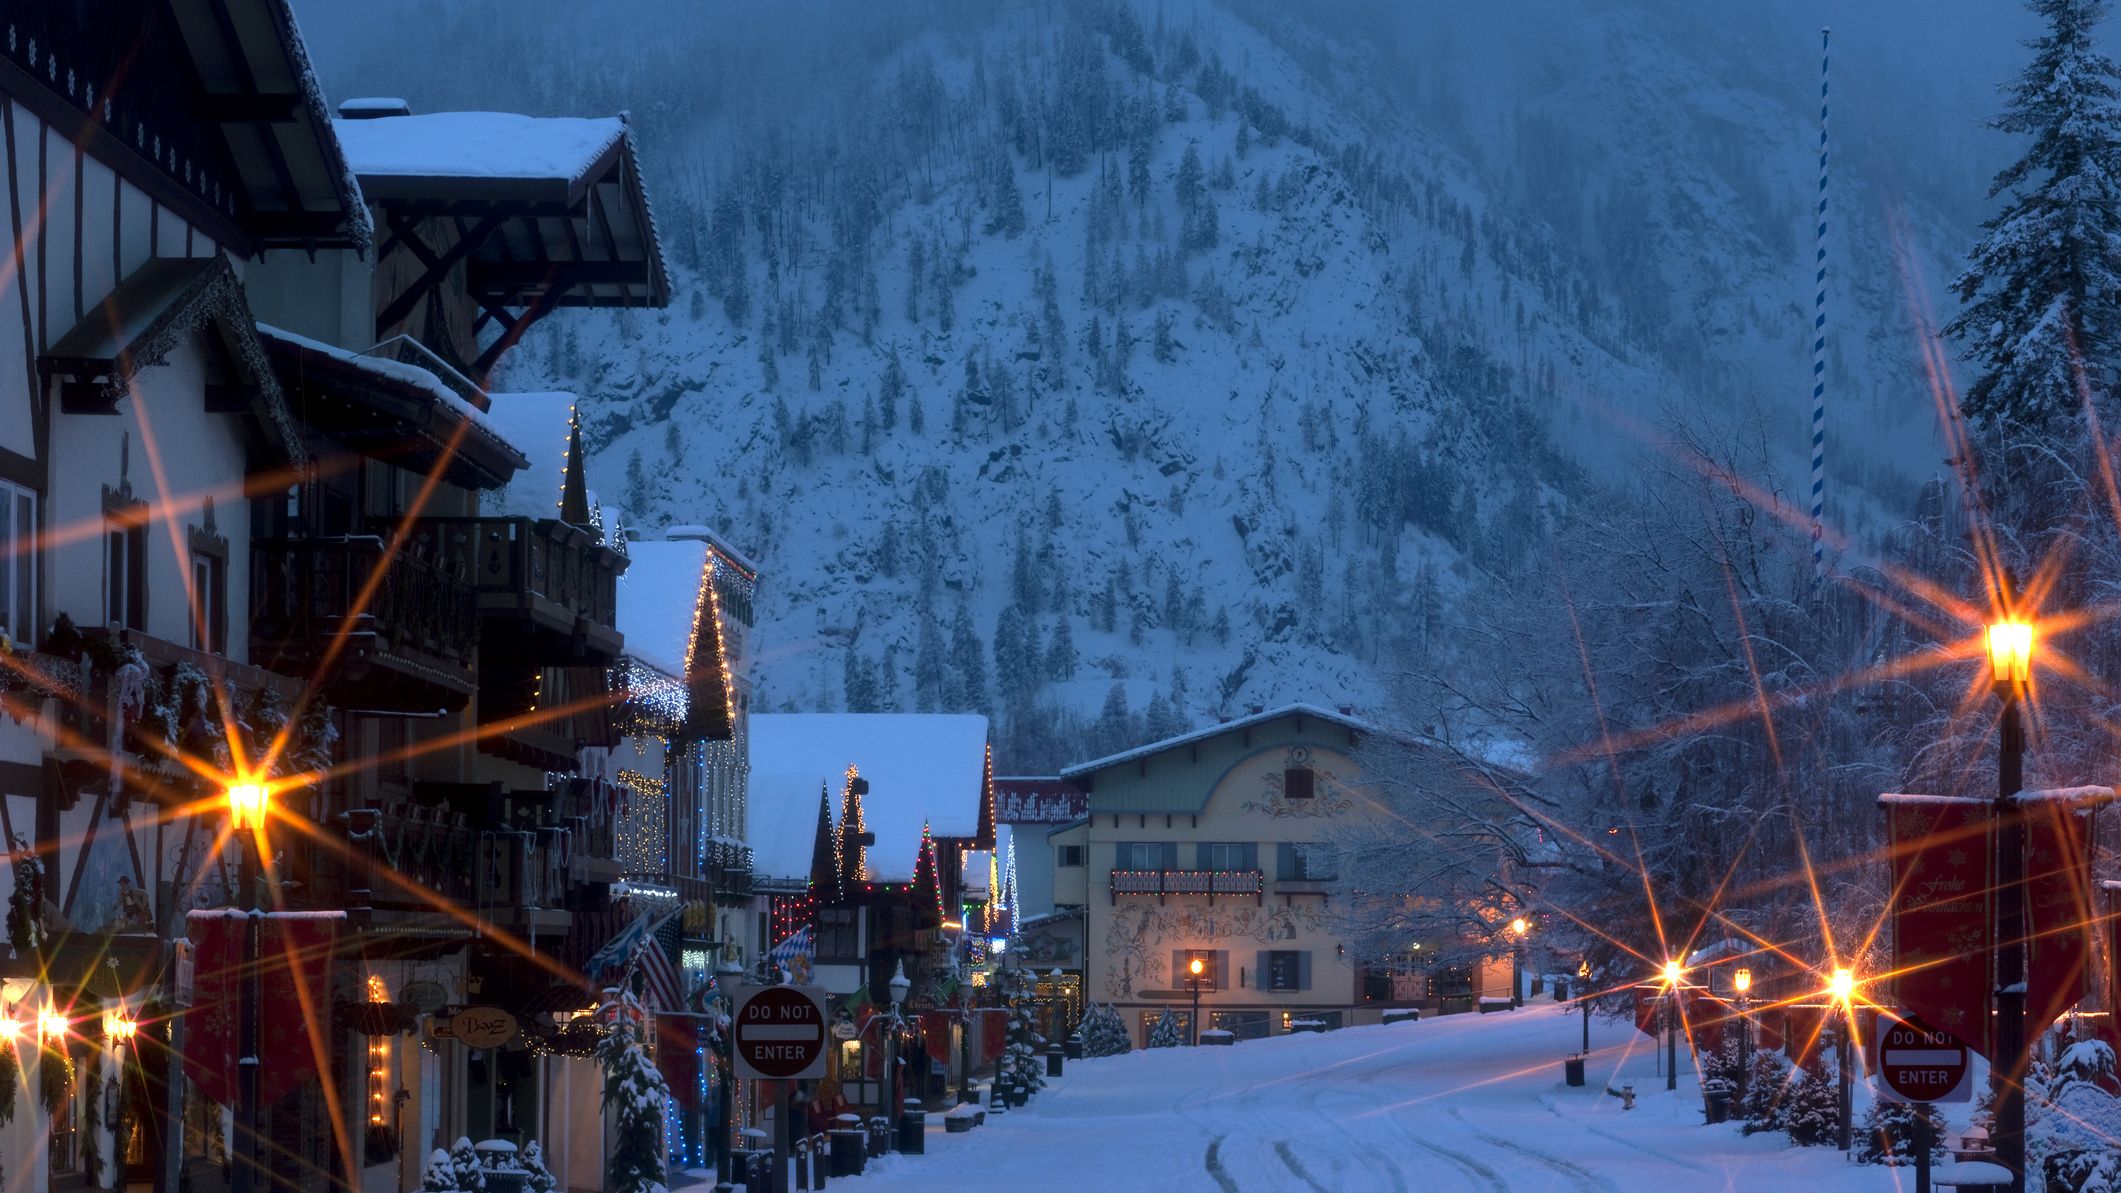 35 Charming Christmas Towns 2023 - Best Christmas Cities in U.S.